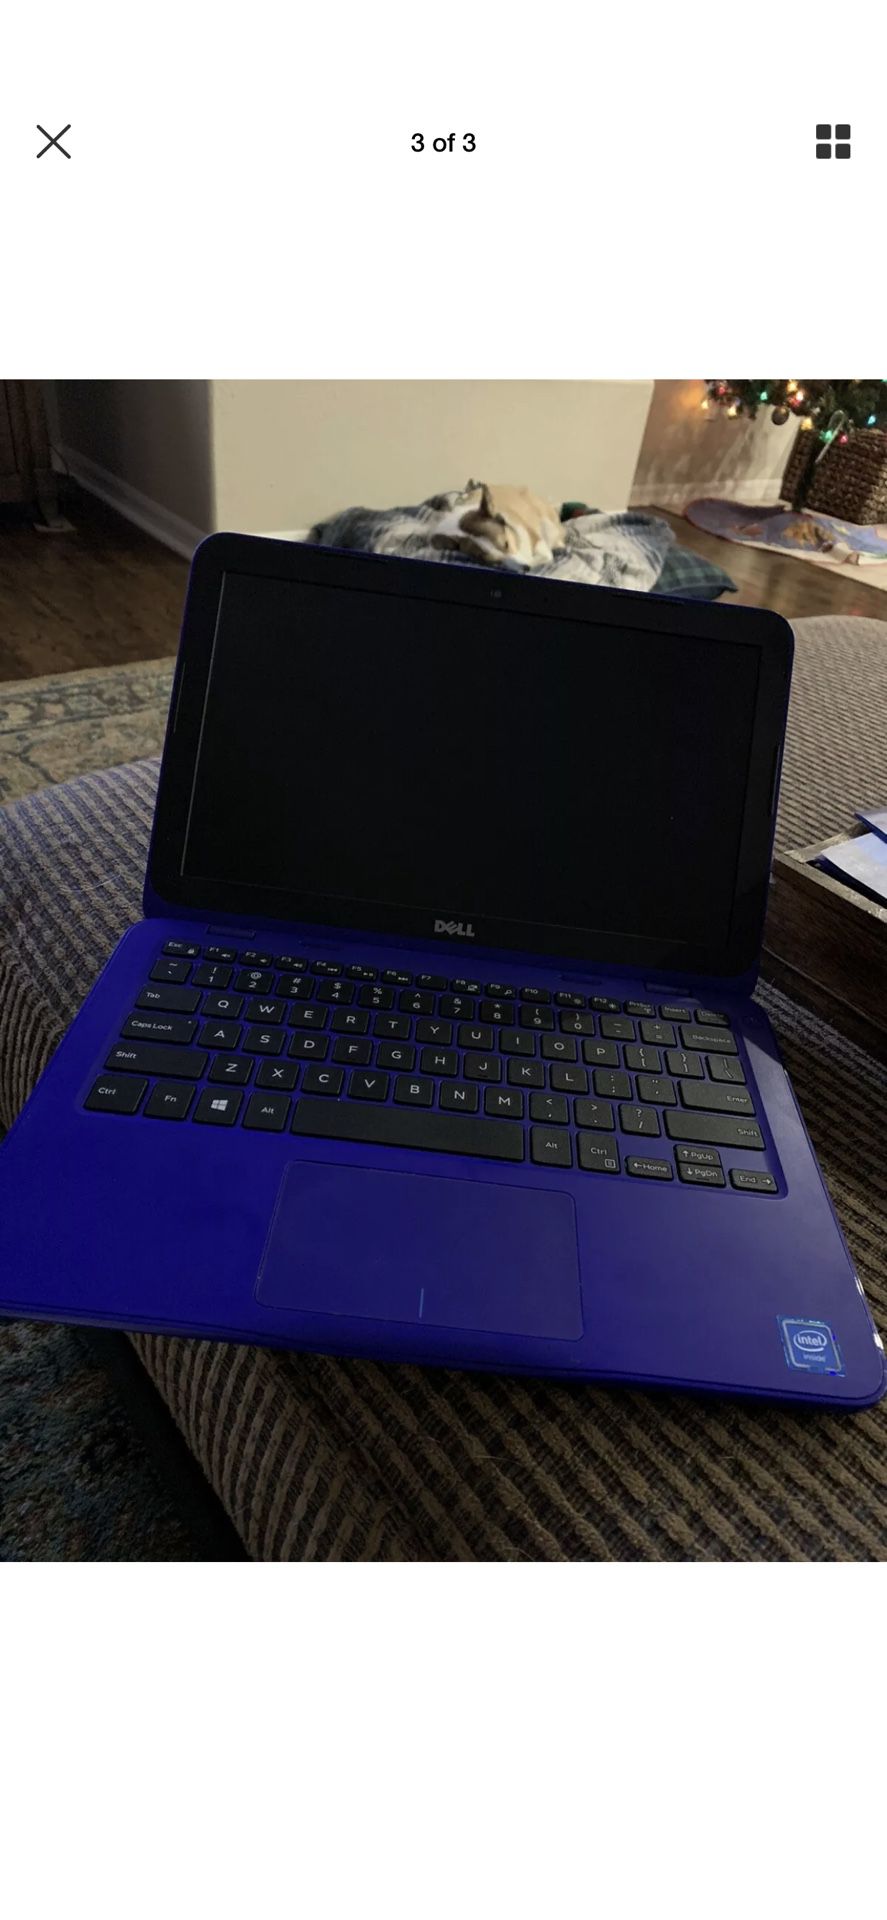 Dell inspiron 11.6in laptop